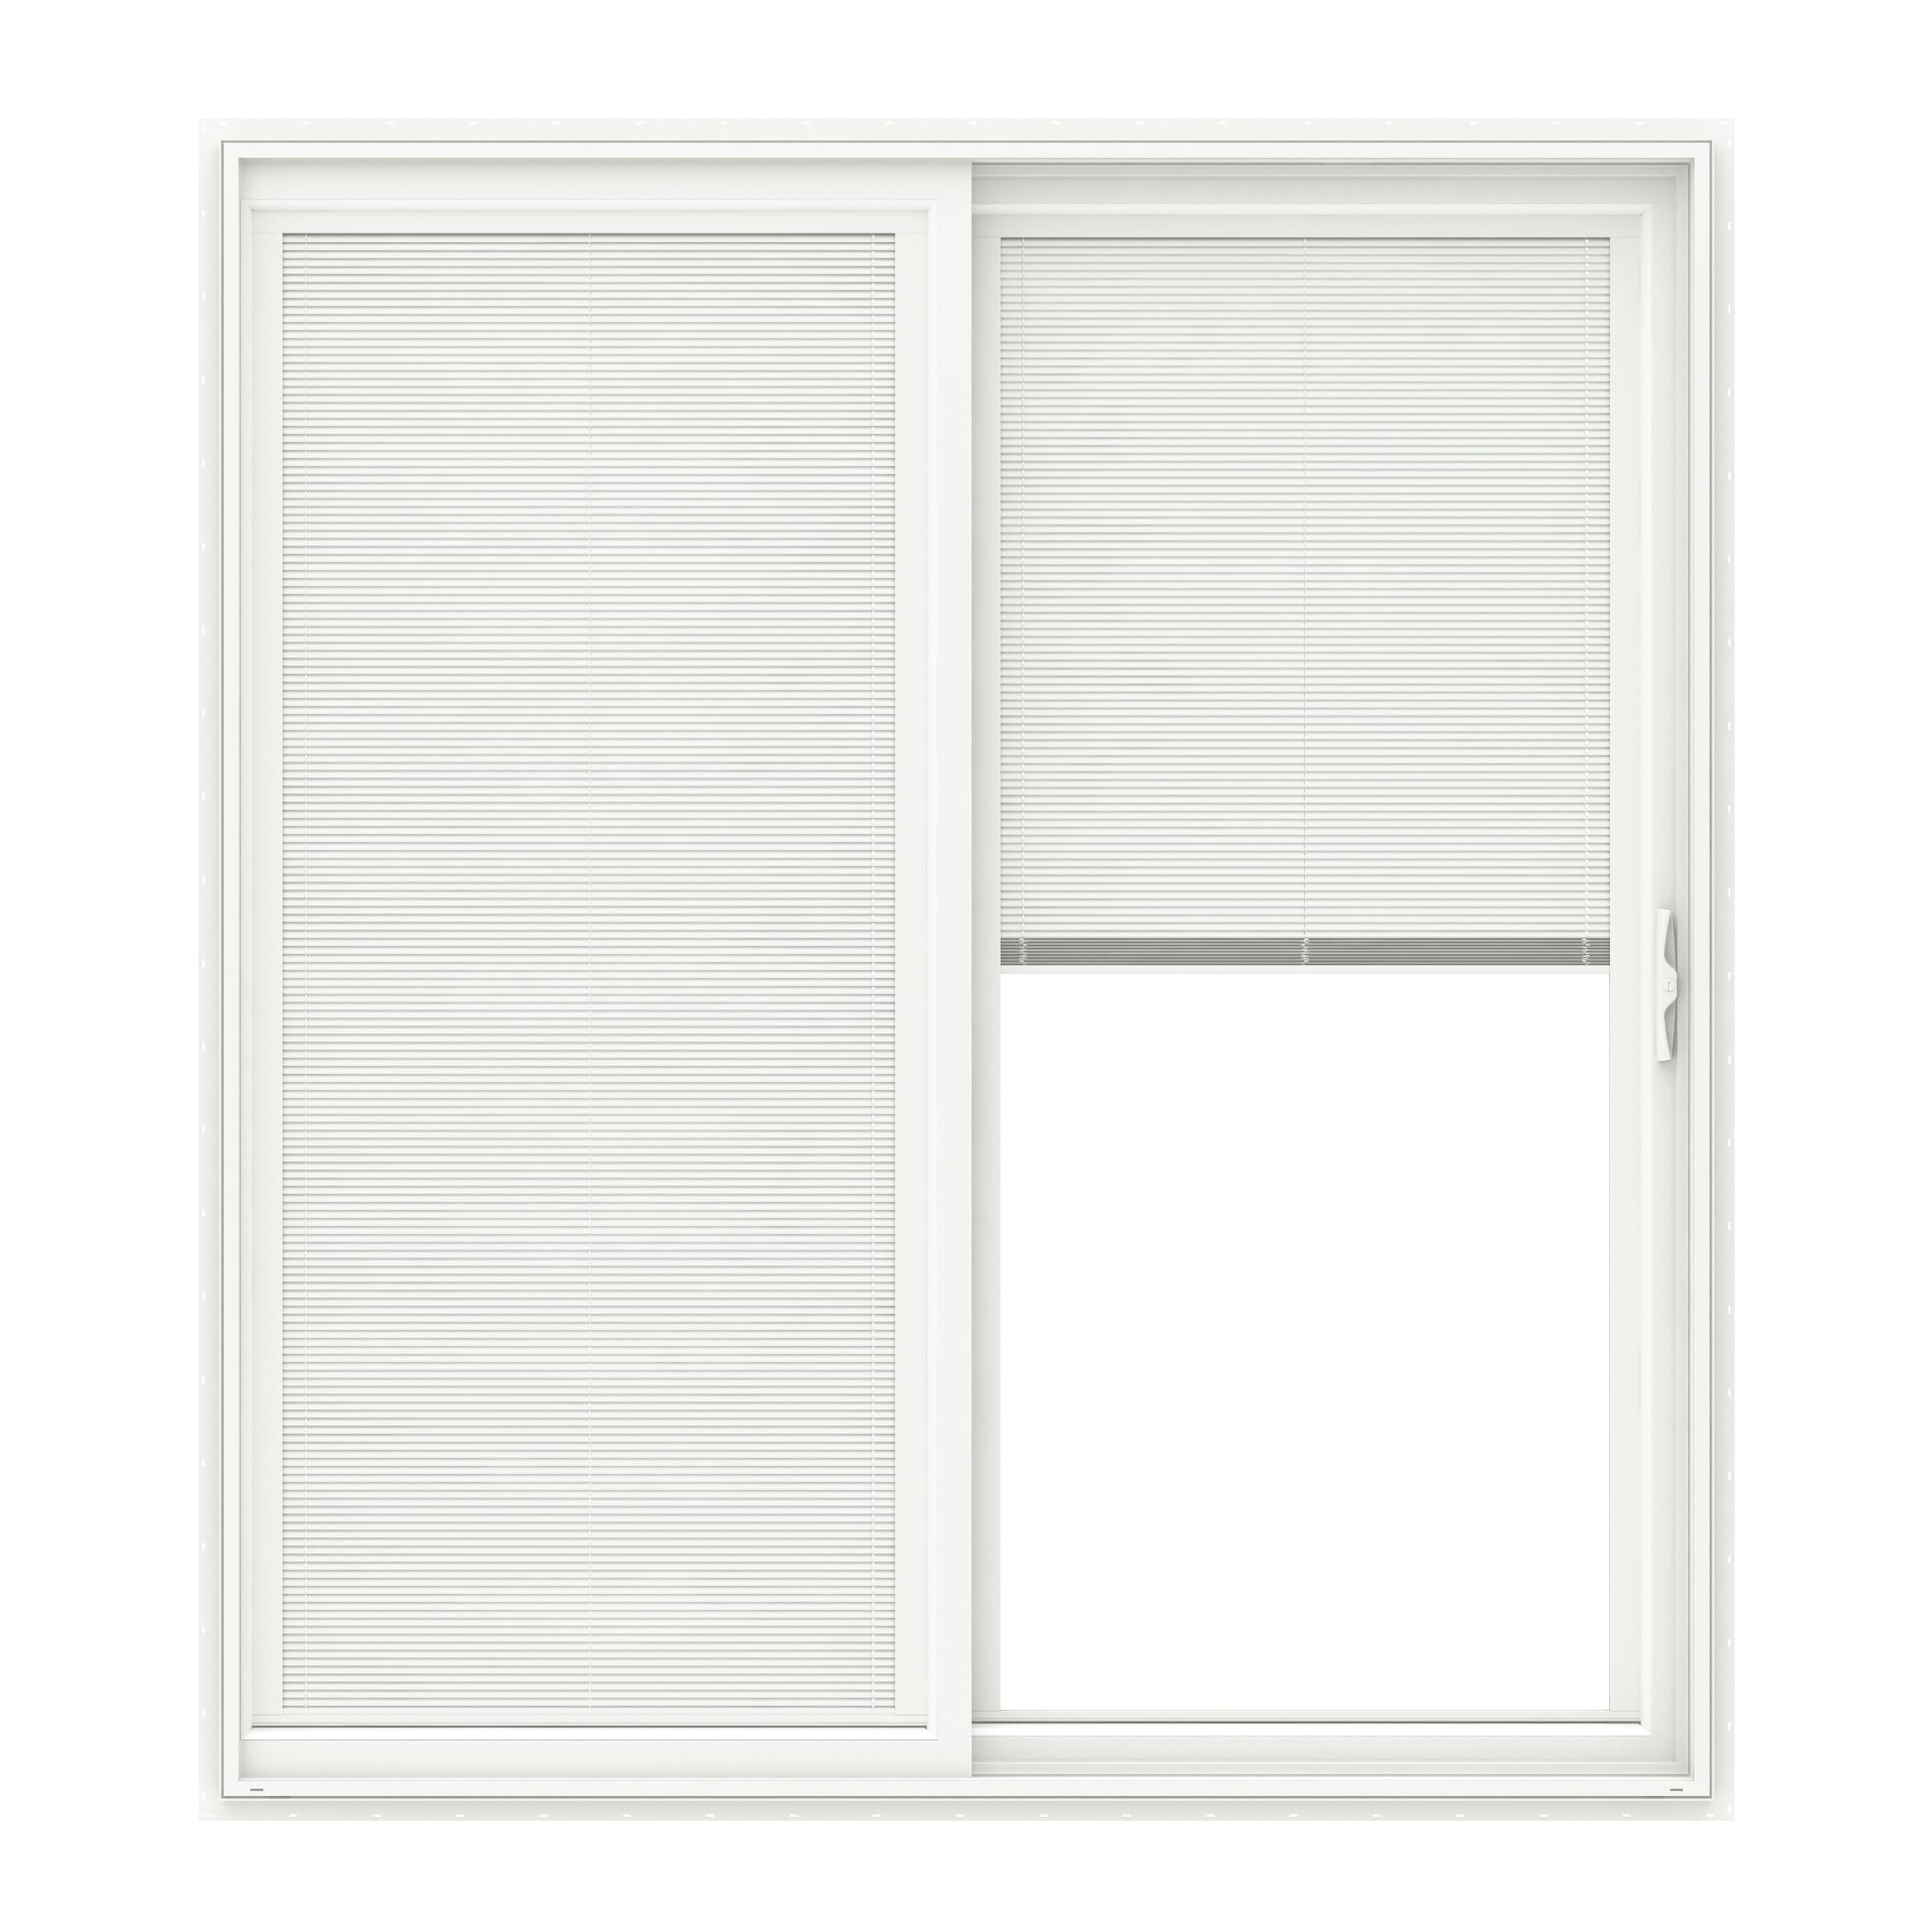 150 Series 72-in x 80-in Low-e Blinds Between The Glass White Vinyl Sliding Right-Hand Sliding Double Patio Door | - Pella 1000009841